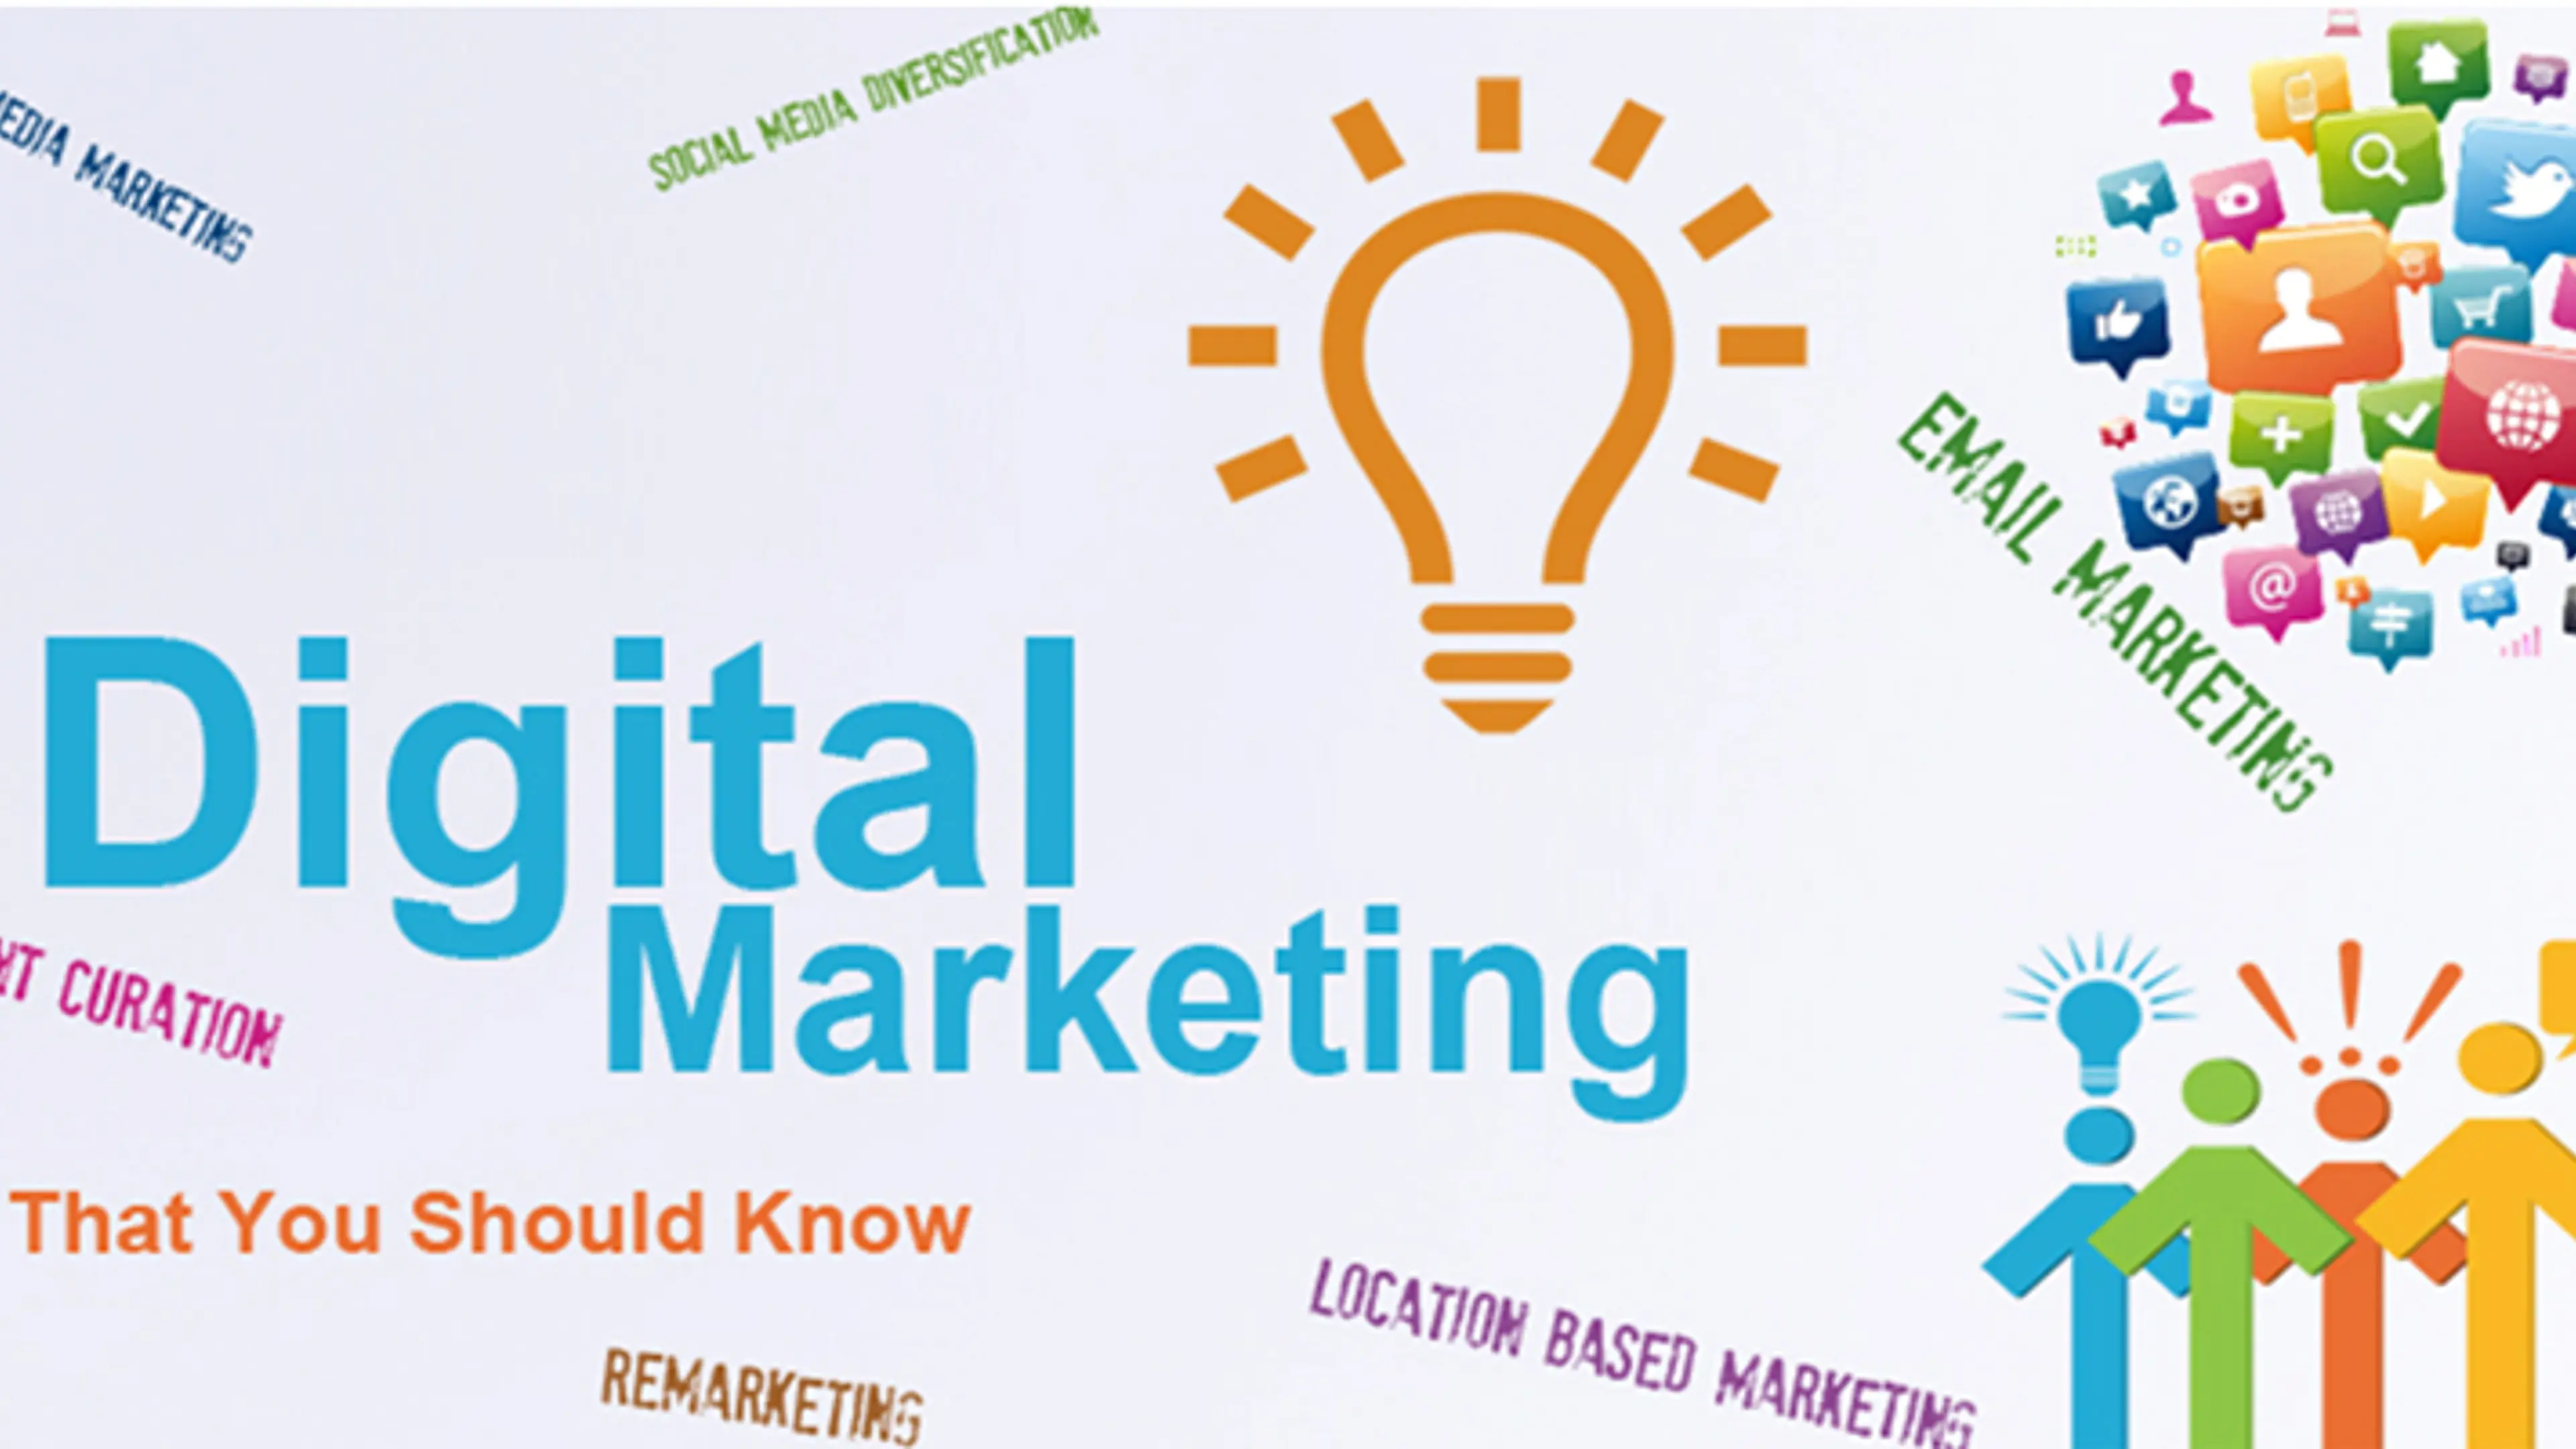 13 ways you can make digital marketing work for you